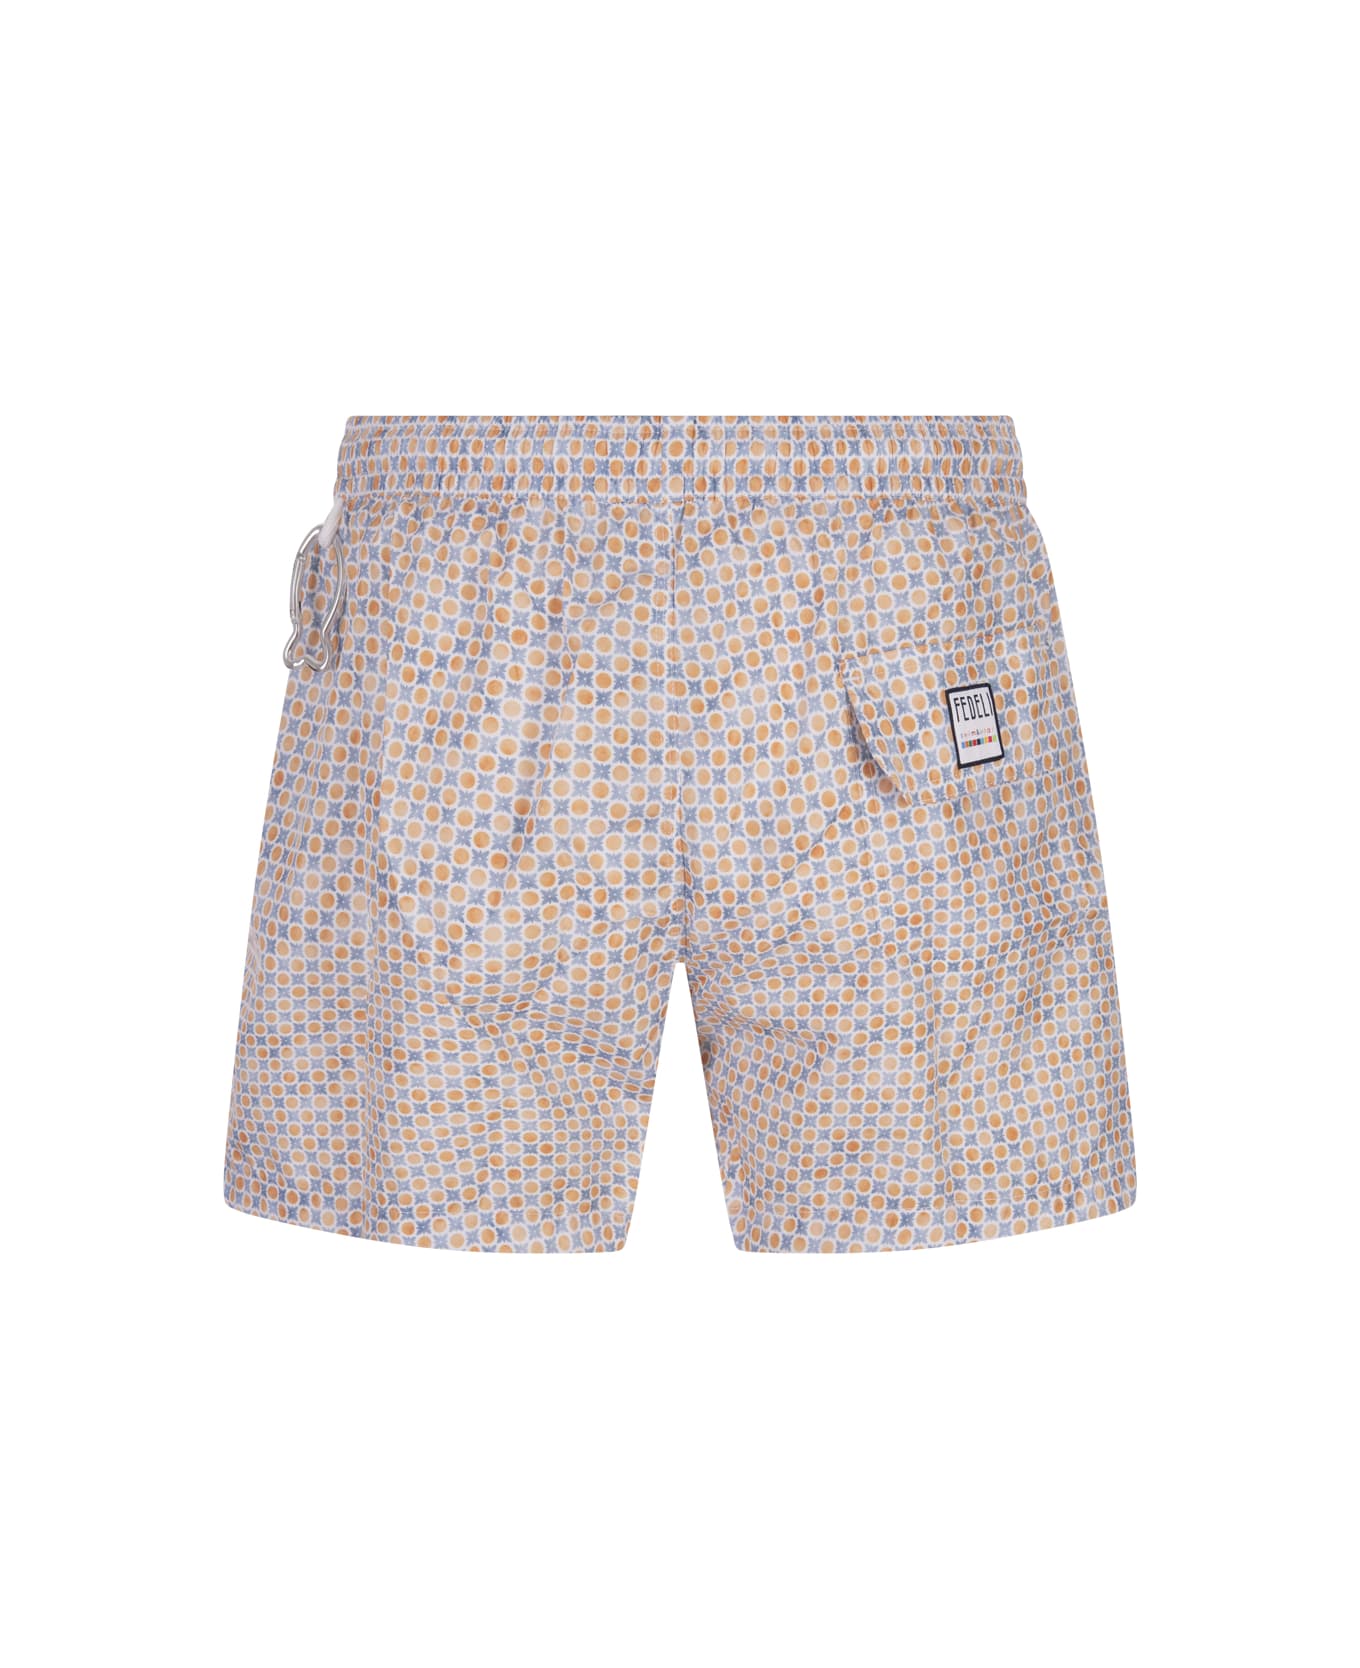 Fedeli Swim Shorts With Micro Pattern Of Polka Dots And Flowers - Orange